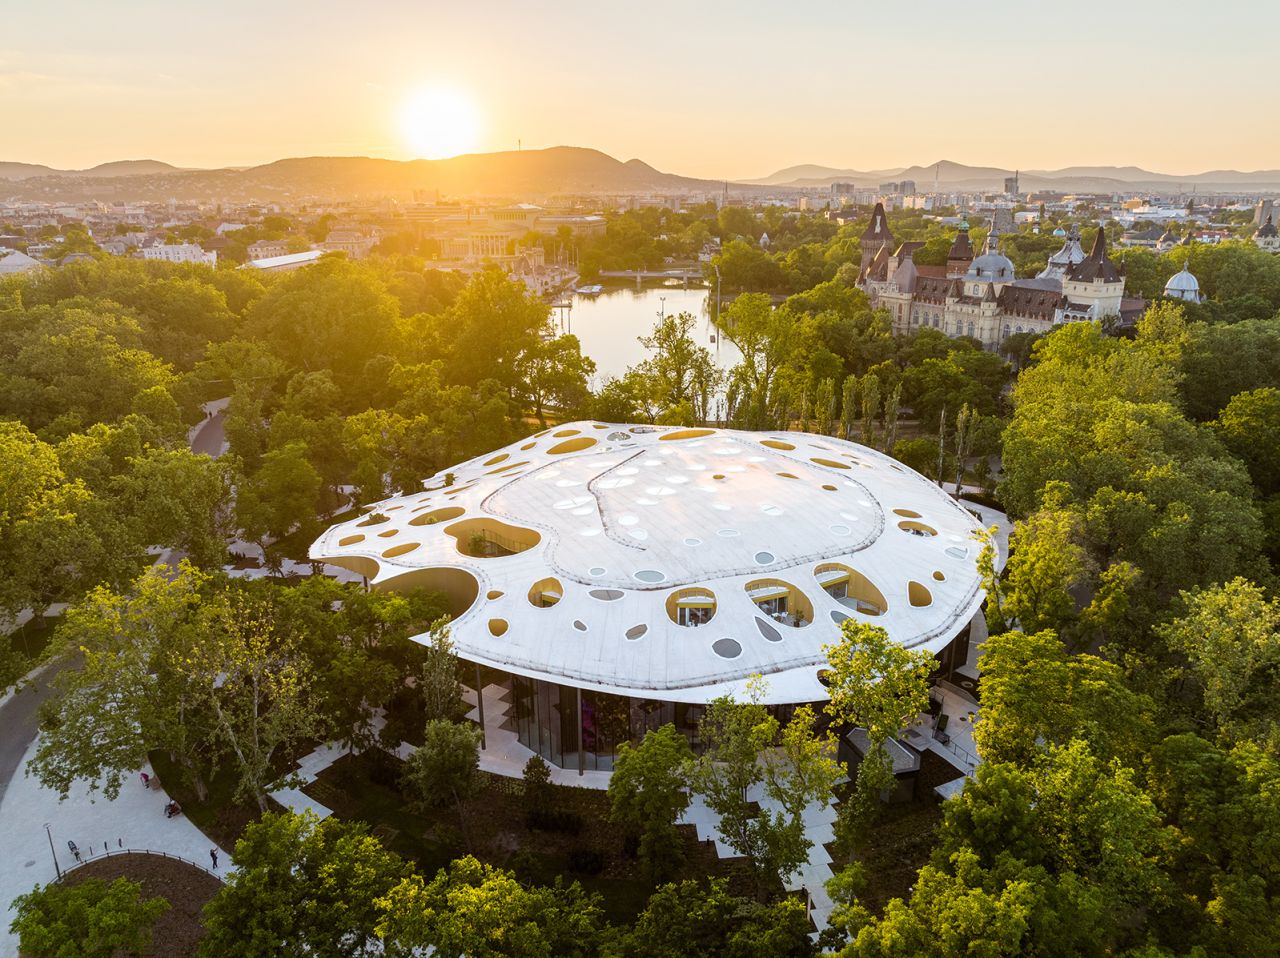 House of Music Hungary in Budapest has a perforated roof that allows for light to shine in and indoor trees to peek out.